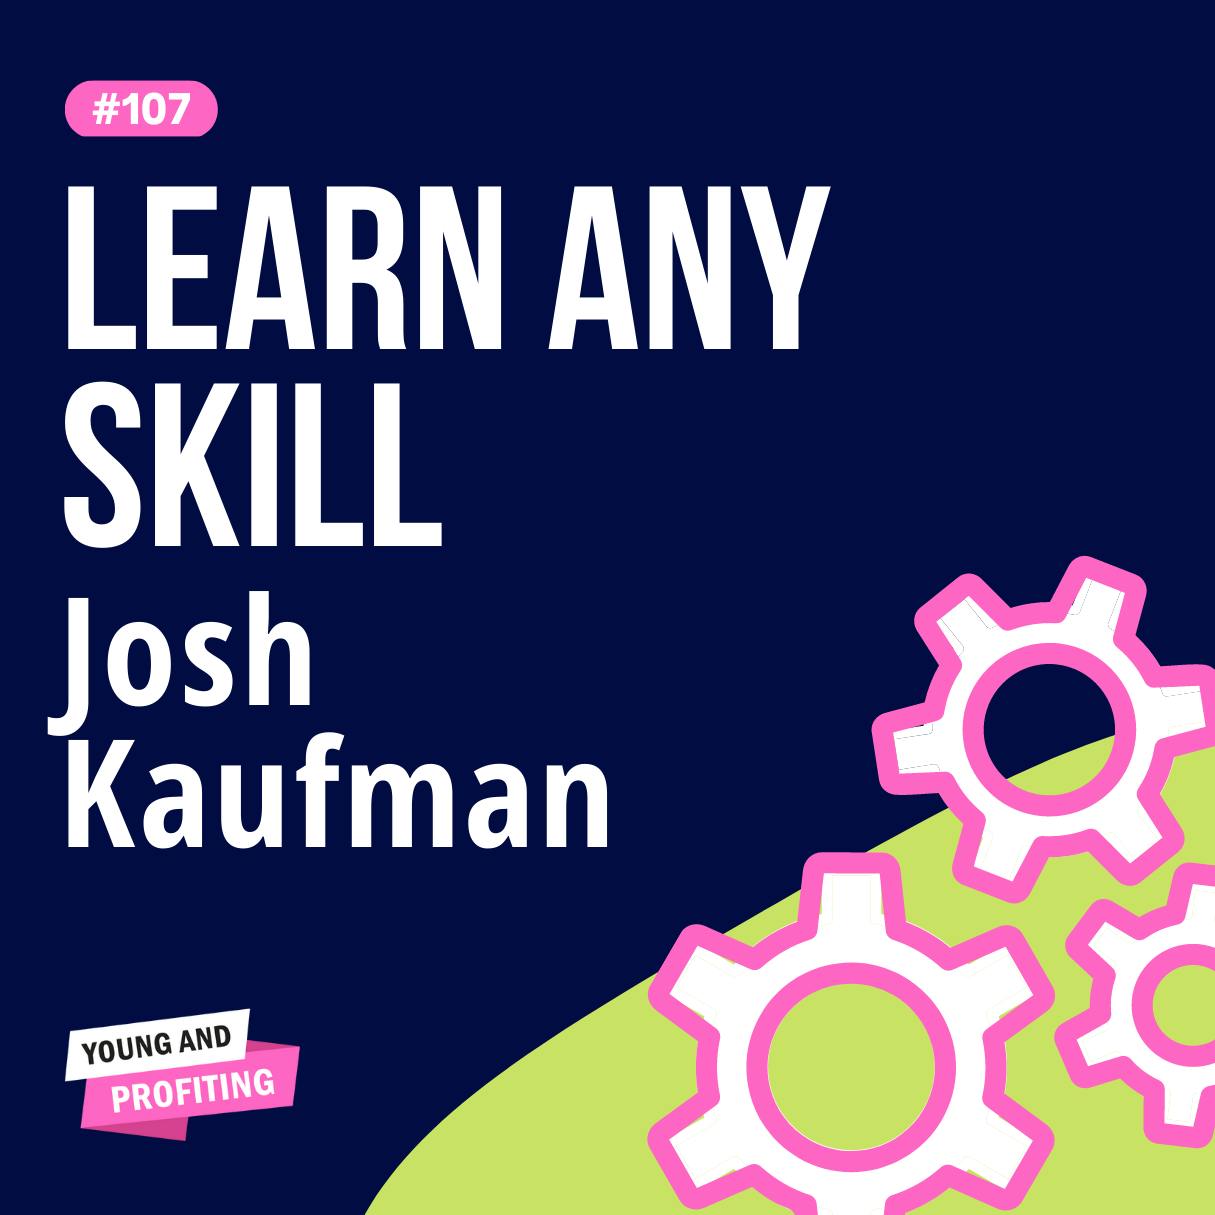 YAPClassic: Josh Kaufman Teaches How to Acquire Any Skill in Just 20 Hours